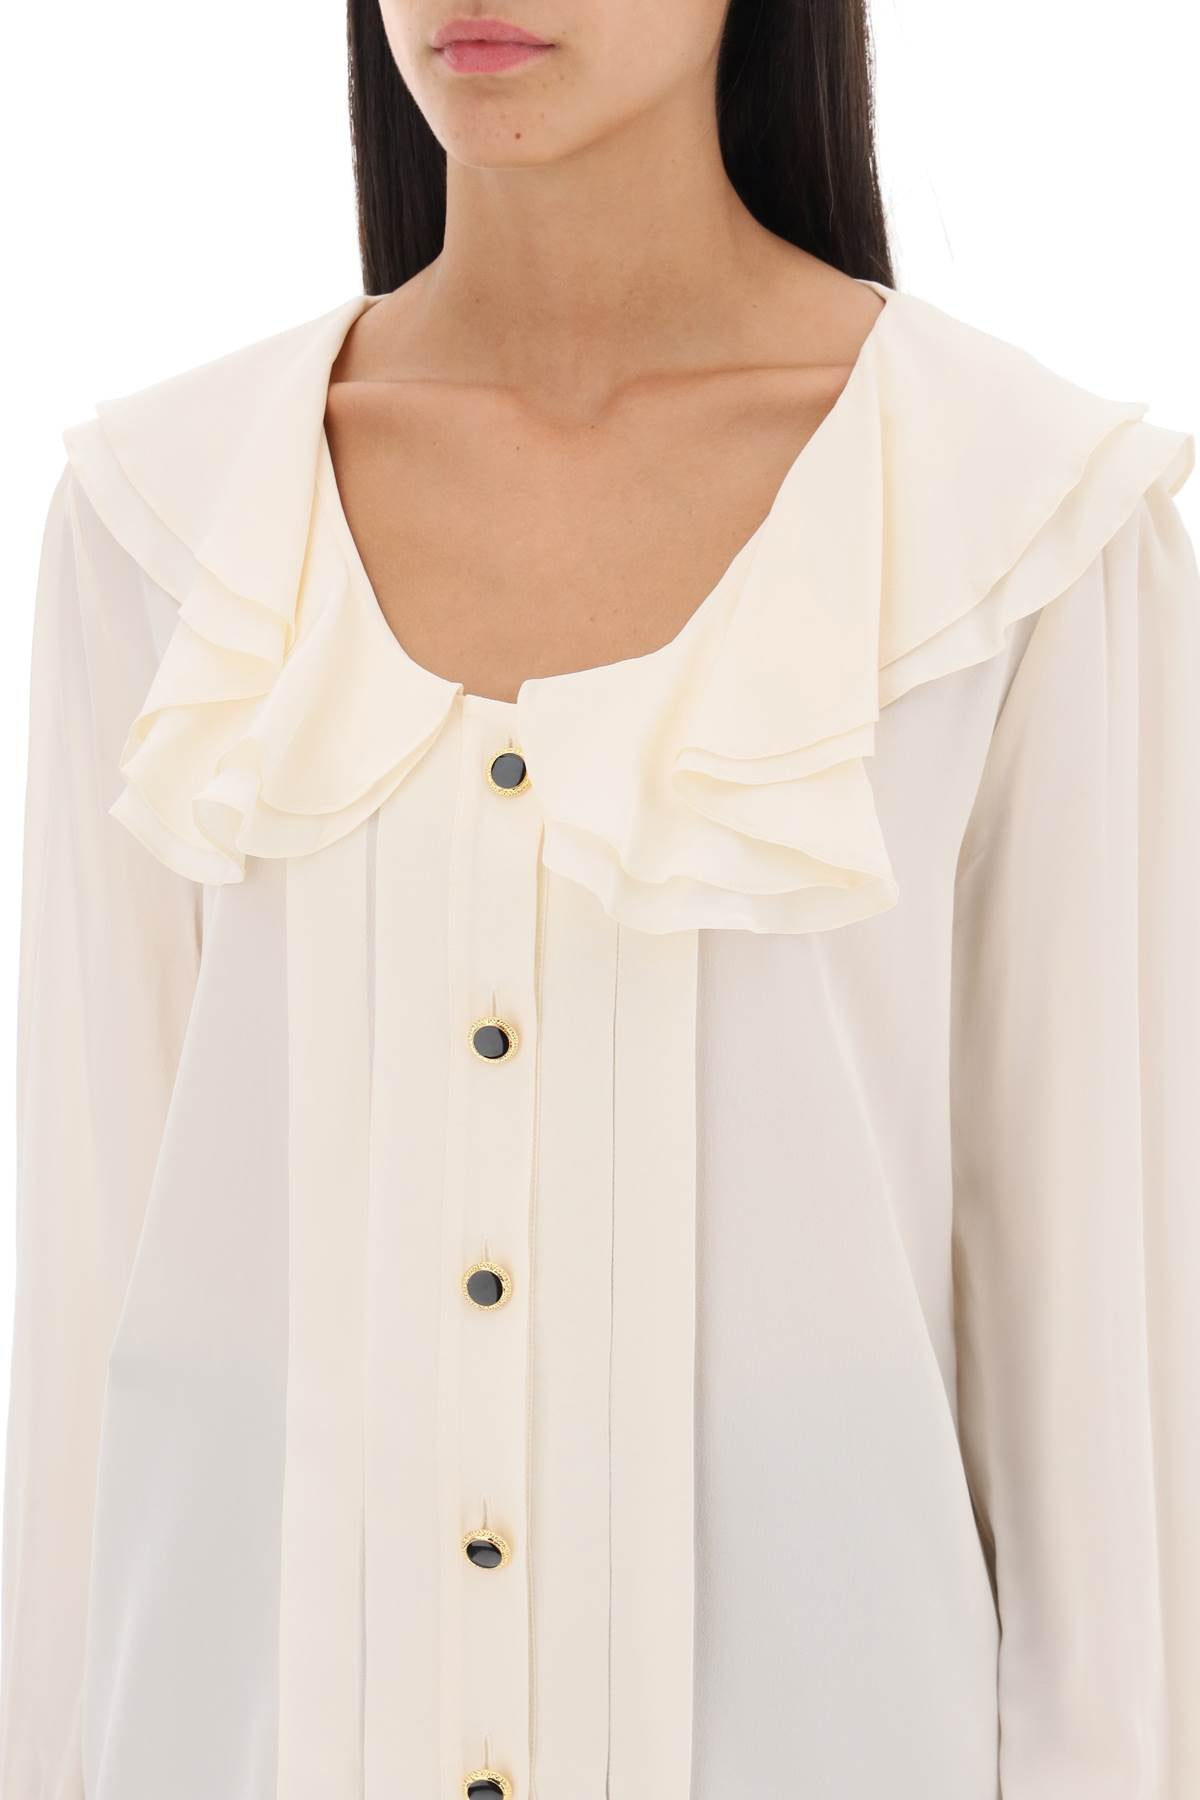 Alessandra rich crepe de chine blouse with frills-women > clothing > shirts and blouses > shirts-Alessandra Rich-40-White-Urbanheer